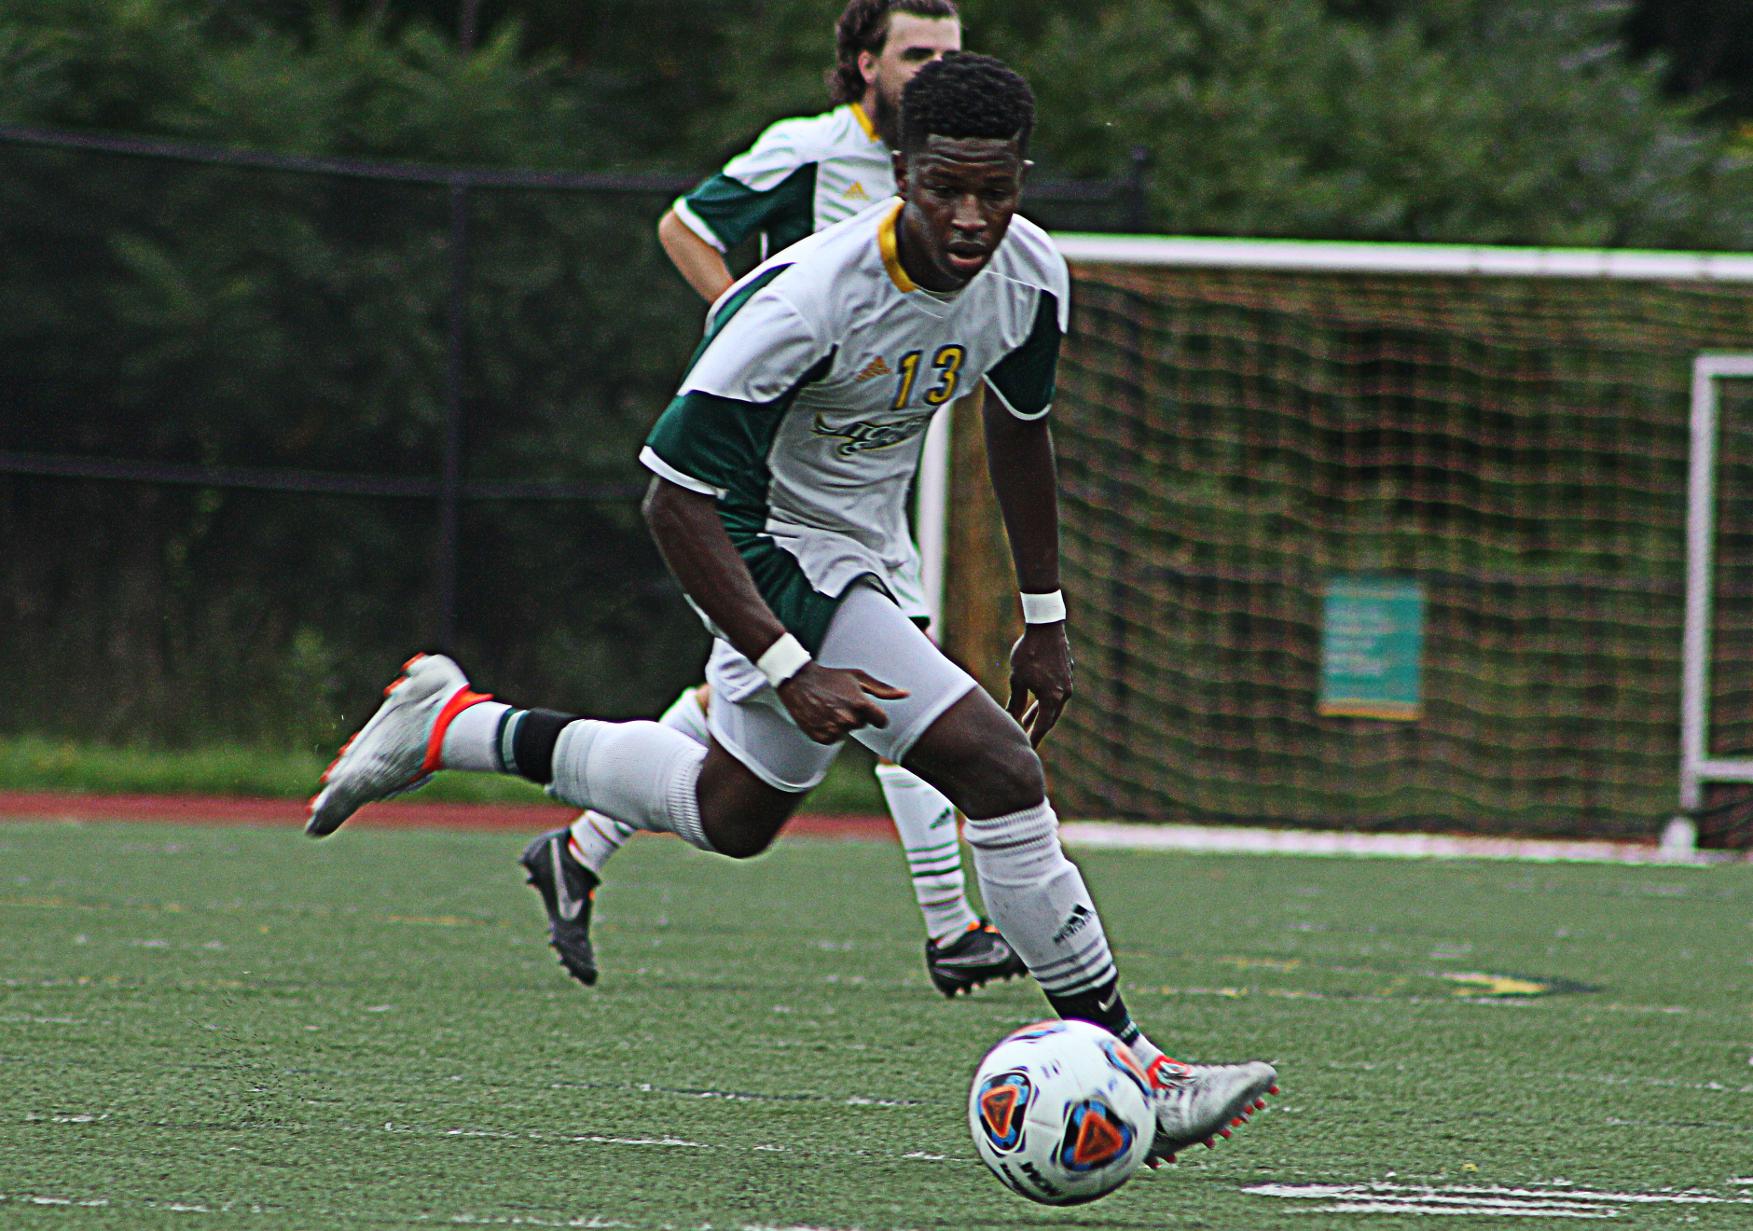 Regis Holds Off Fitchburg State, 2-1